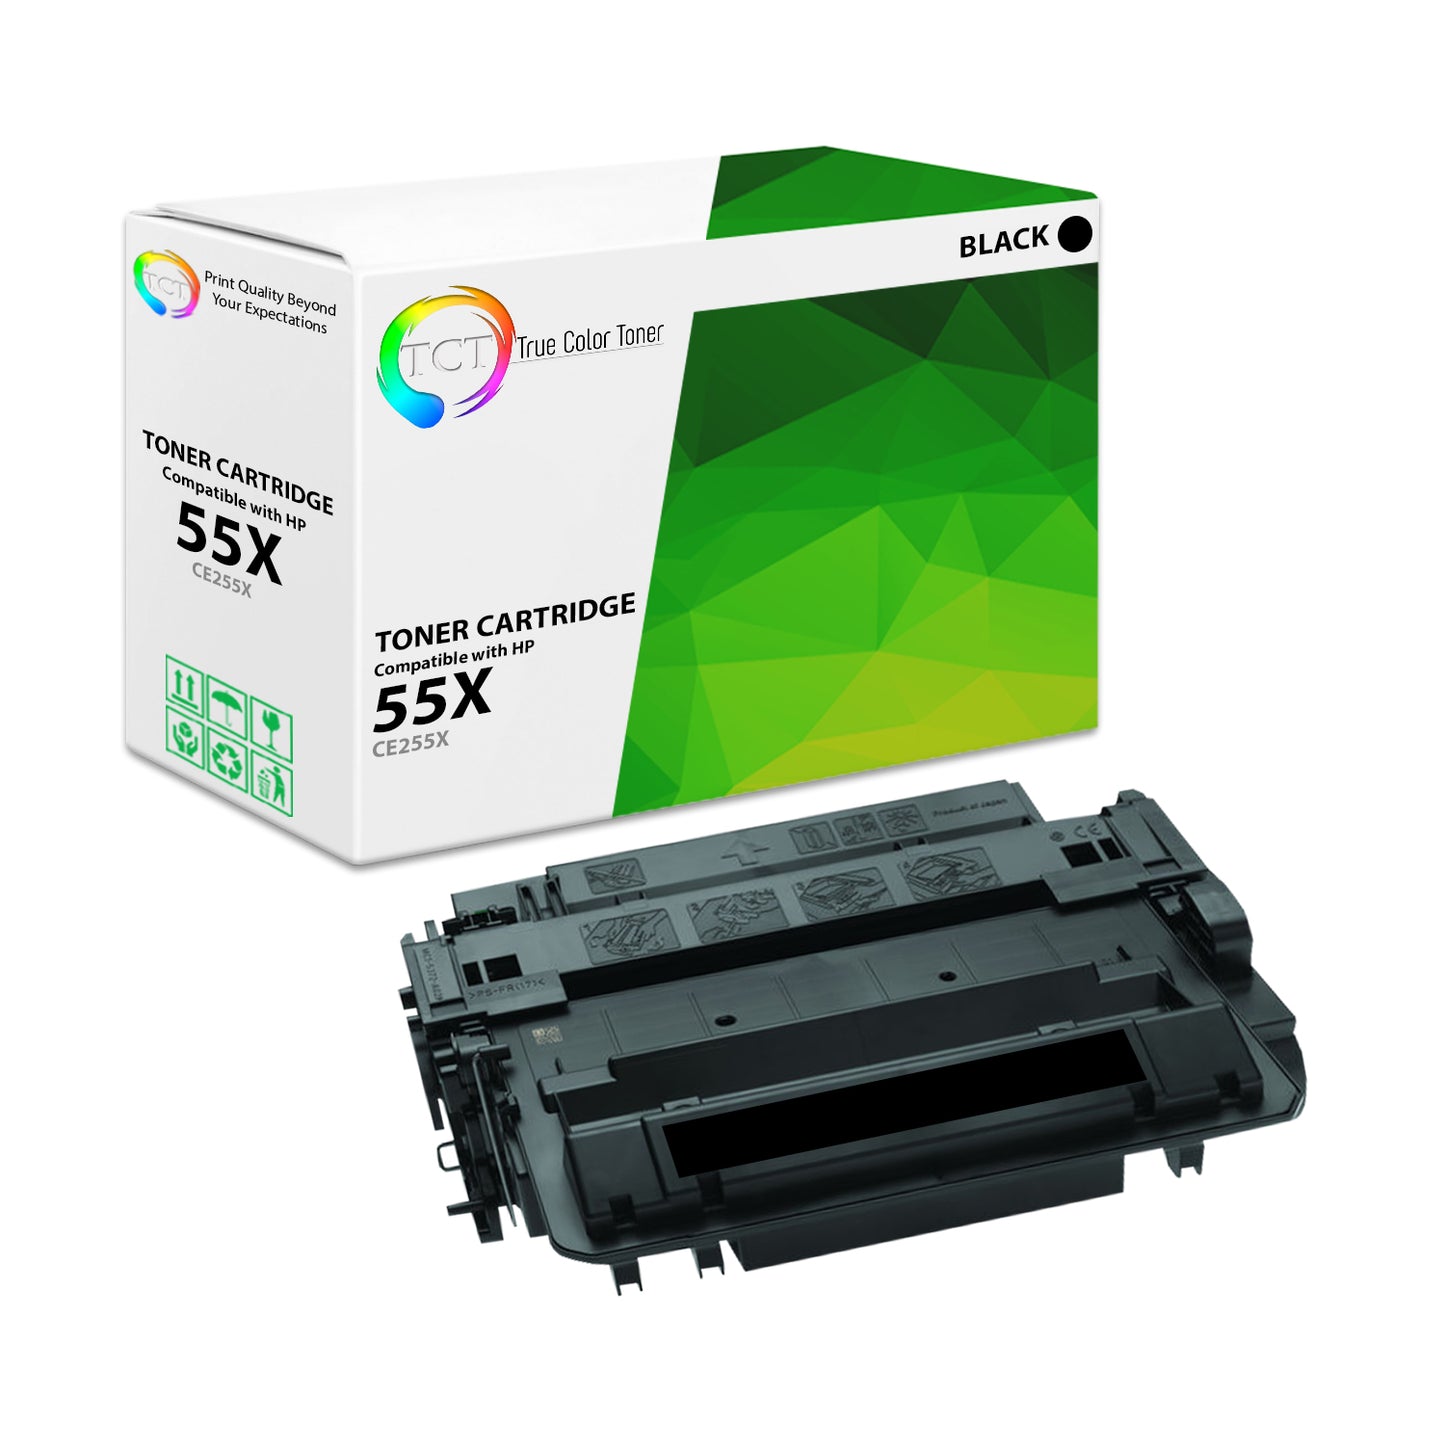 TCT Compatible High Yield Toner Cartridge Replacement for the HP 55X Series - 1 Pack Black